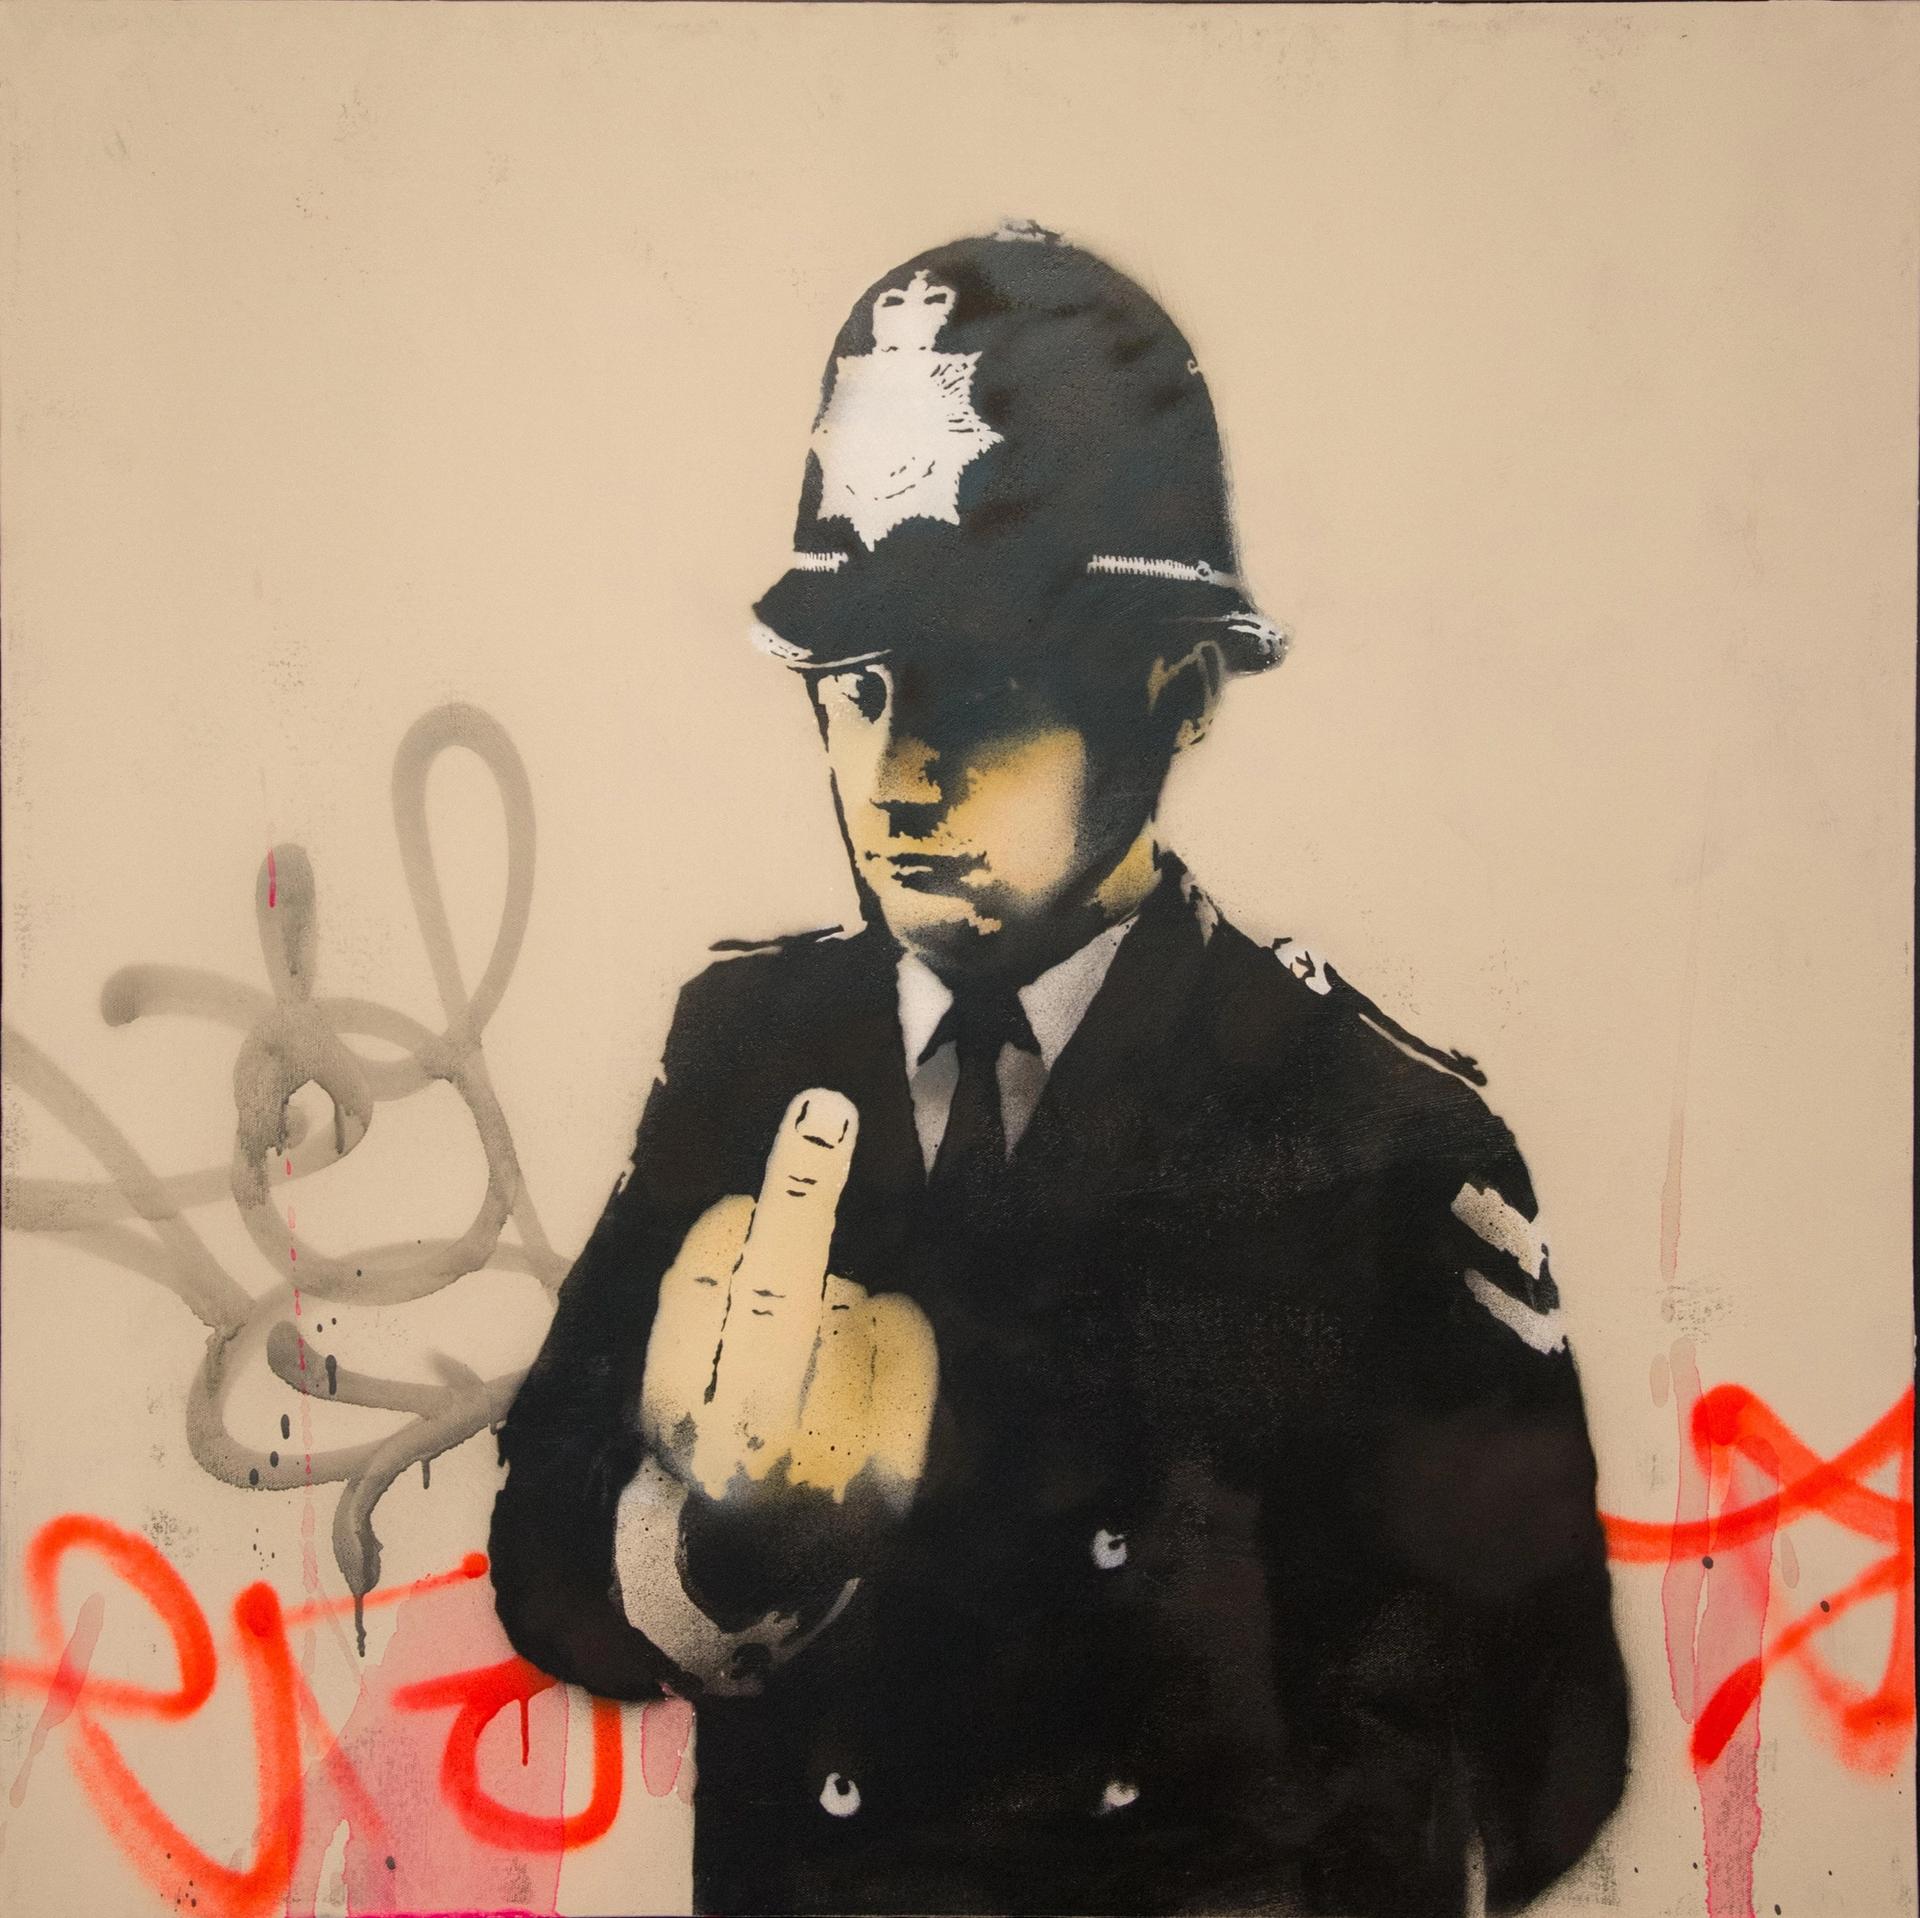 A version of Banksy's Rude Copper, similar to those bought by Maurizio Fabris according to the ICIJ

Photo: Jan Fritz / Alamy Stock Photo